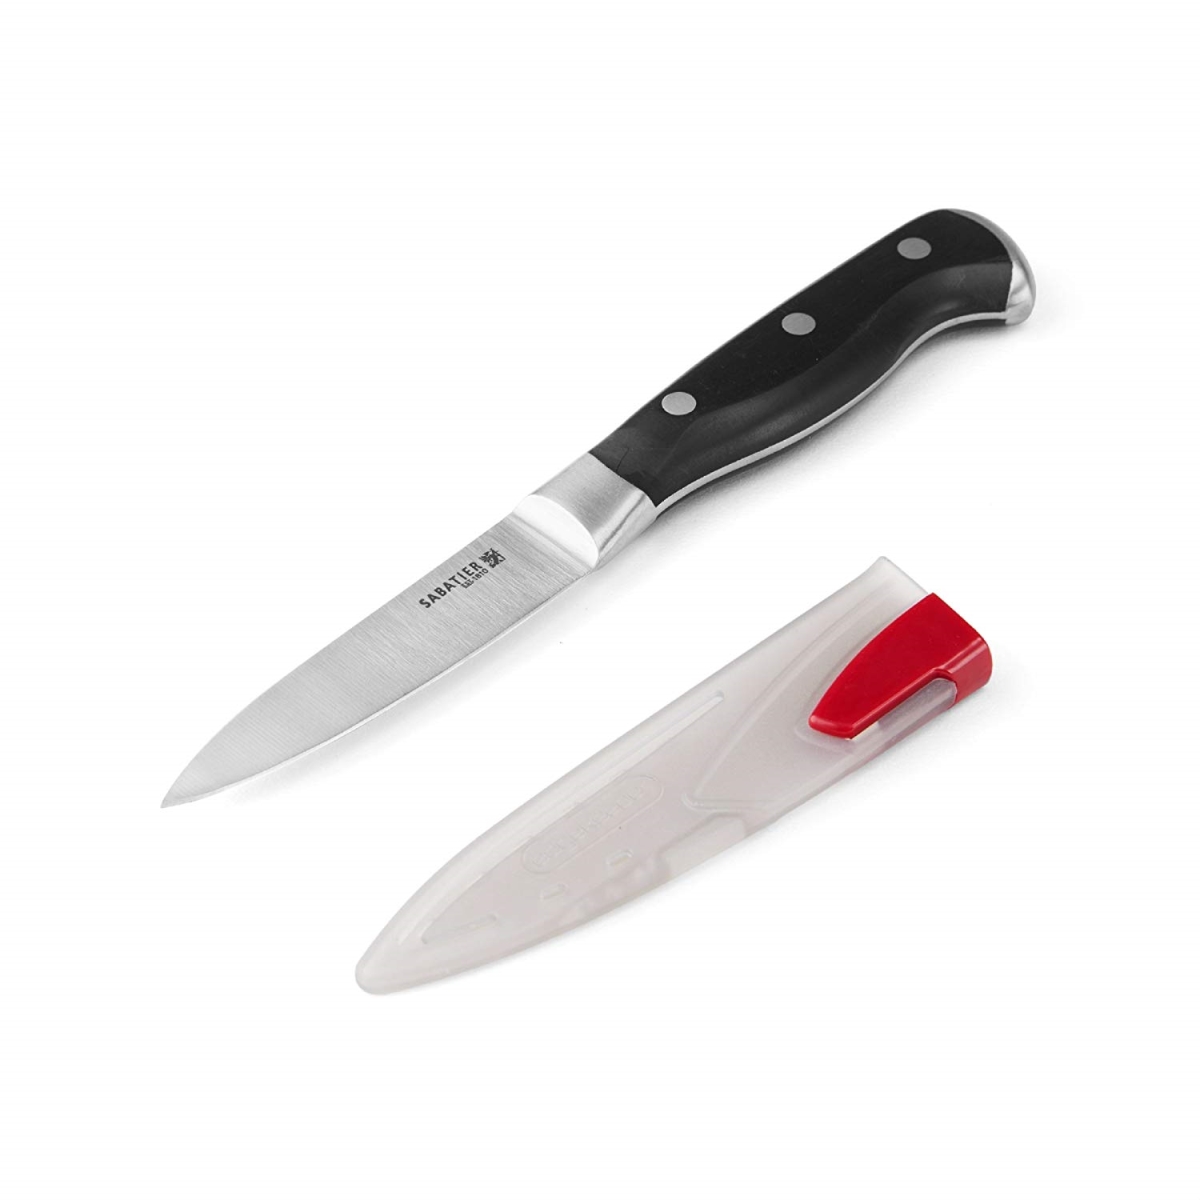 5171959 3.5 In. Triple-riveted Stainless Steel Paring Knife - Pack Of 3